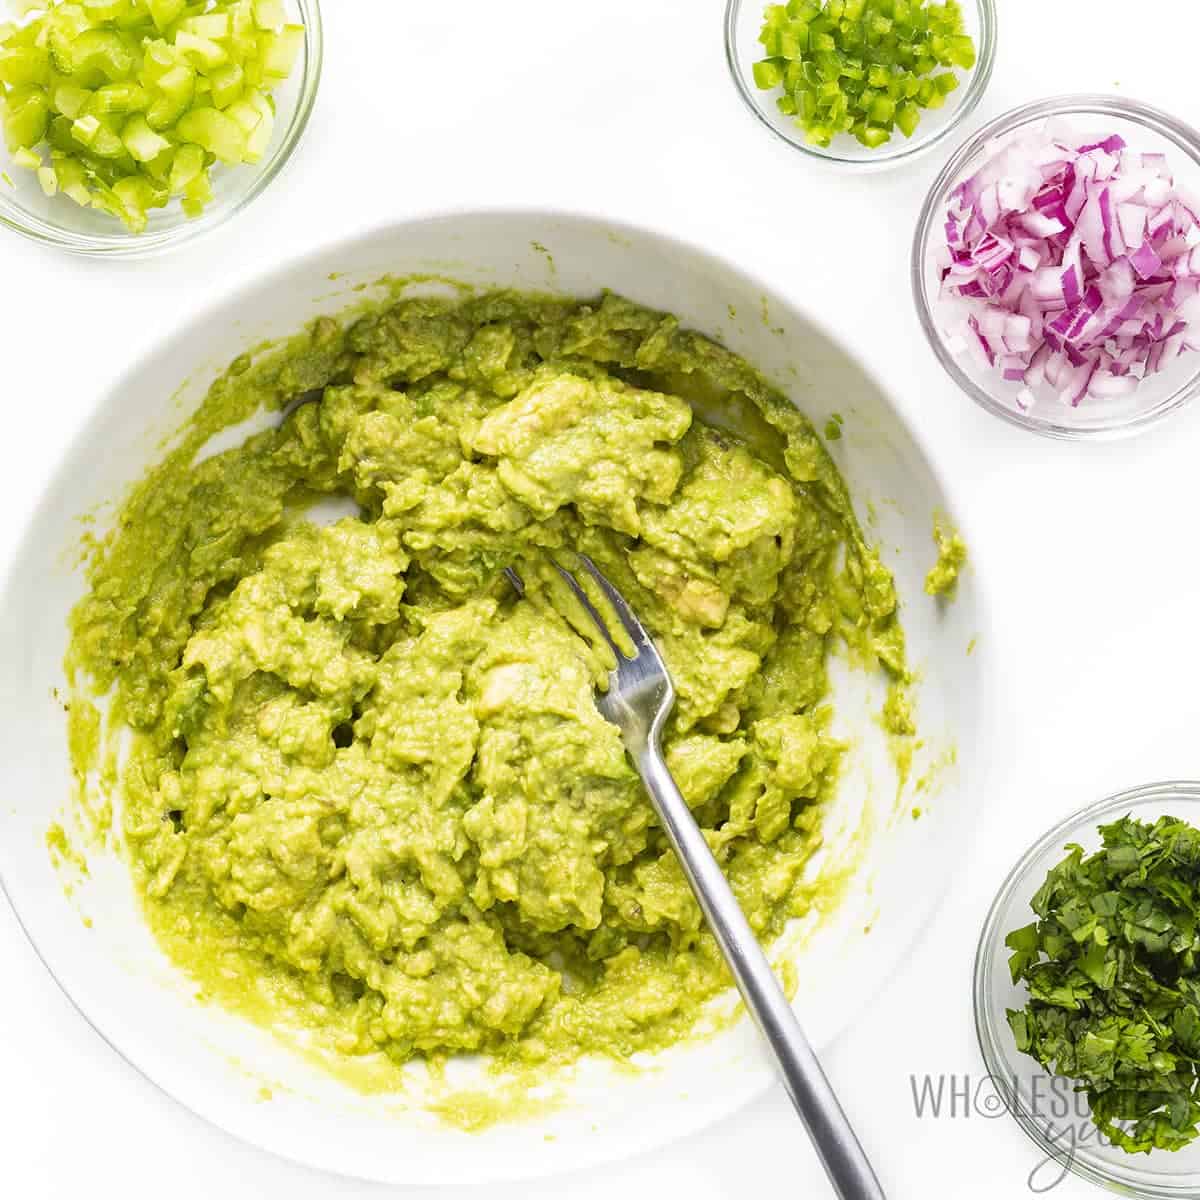 Mashed avocado with other salad ingredients to the side.